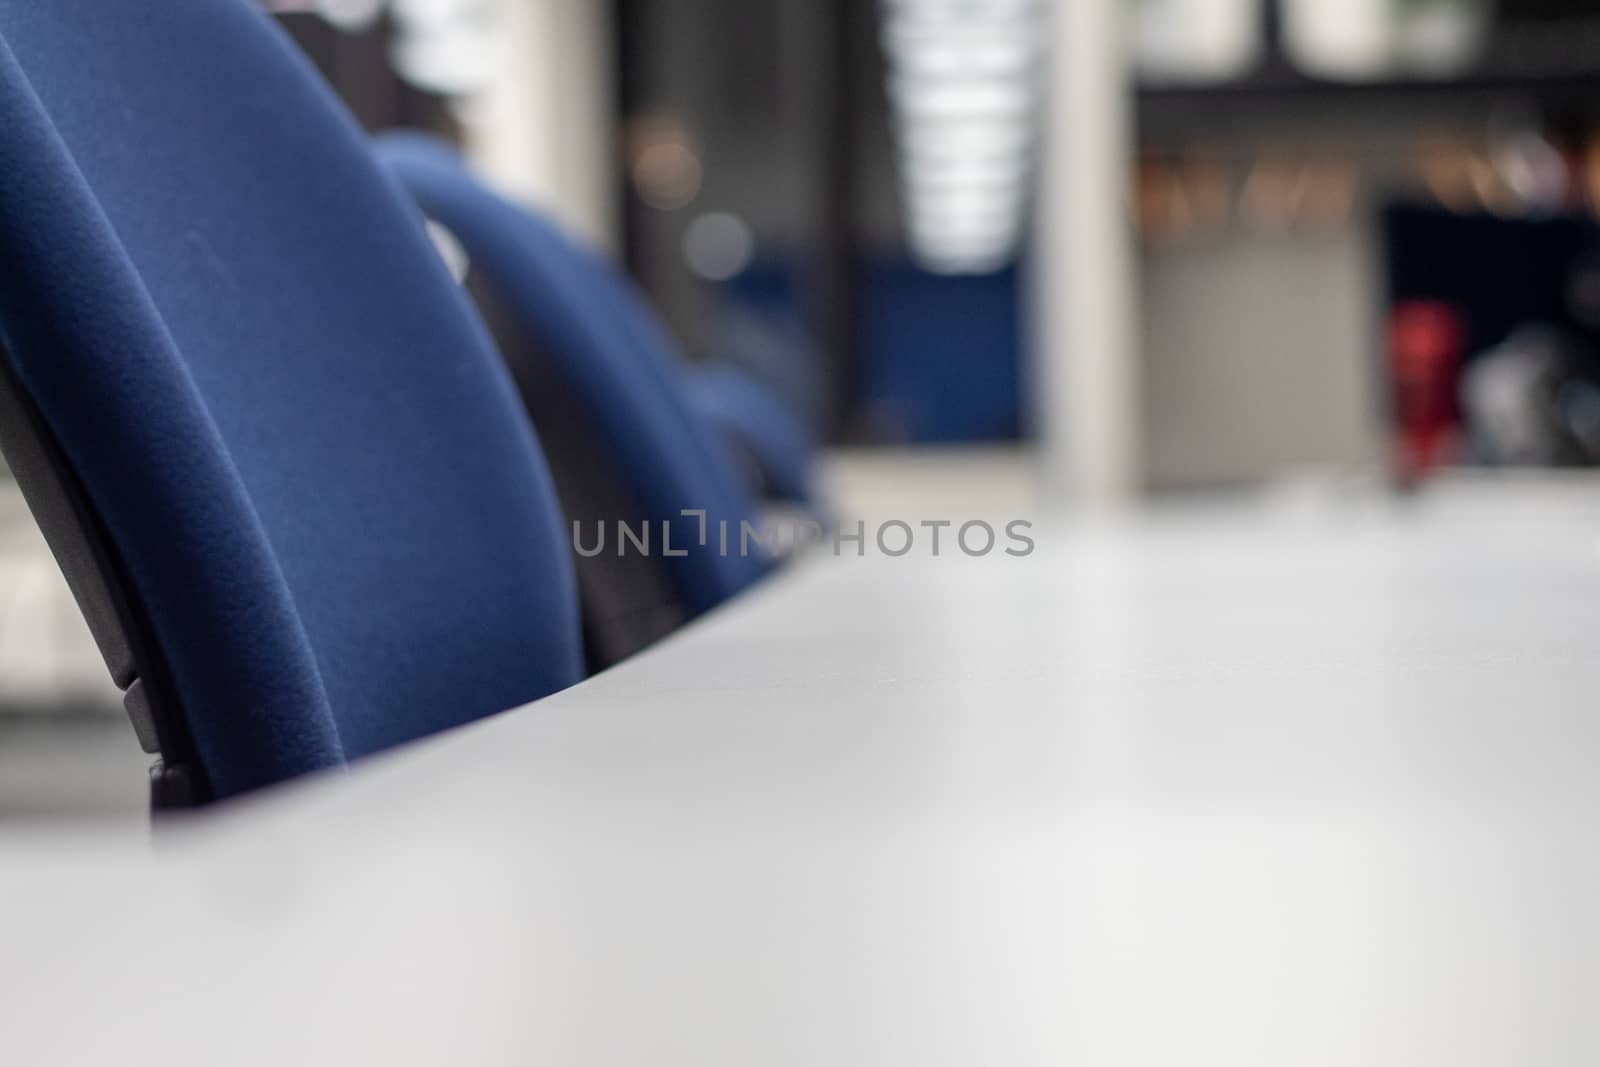 Chairs are lined up at a long desk in a co-working office space. The chairs are seen from the level of the desk and fade into a blurry background with that surface.